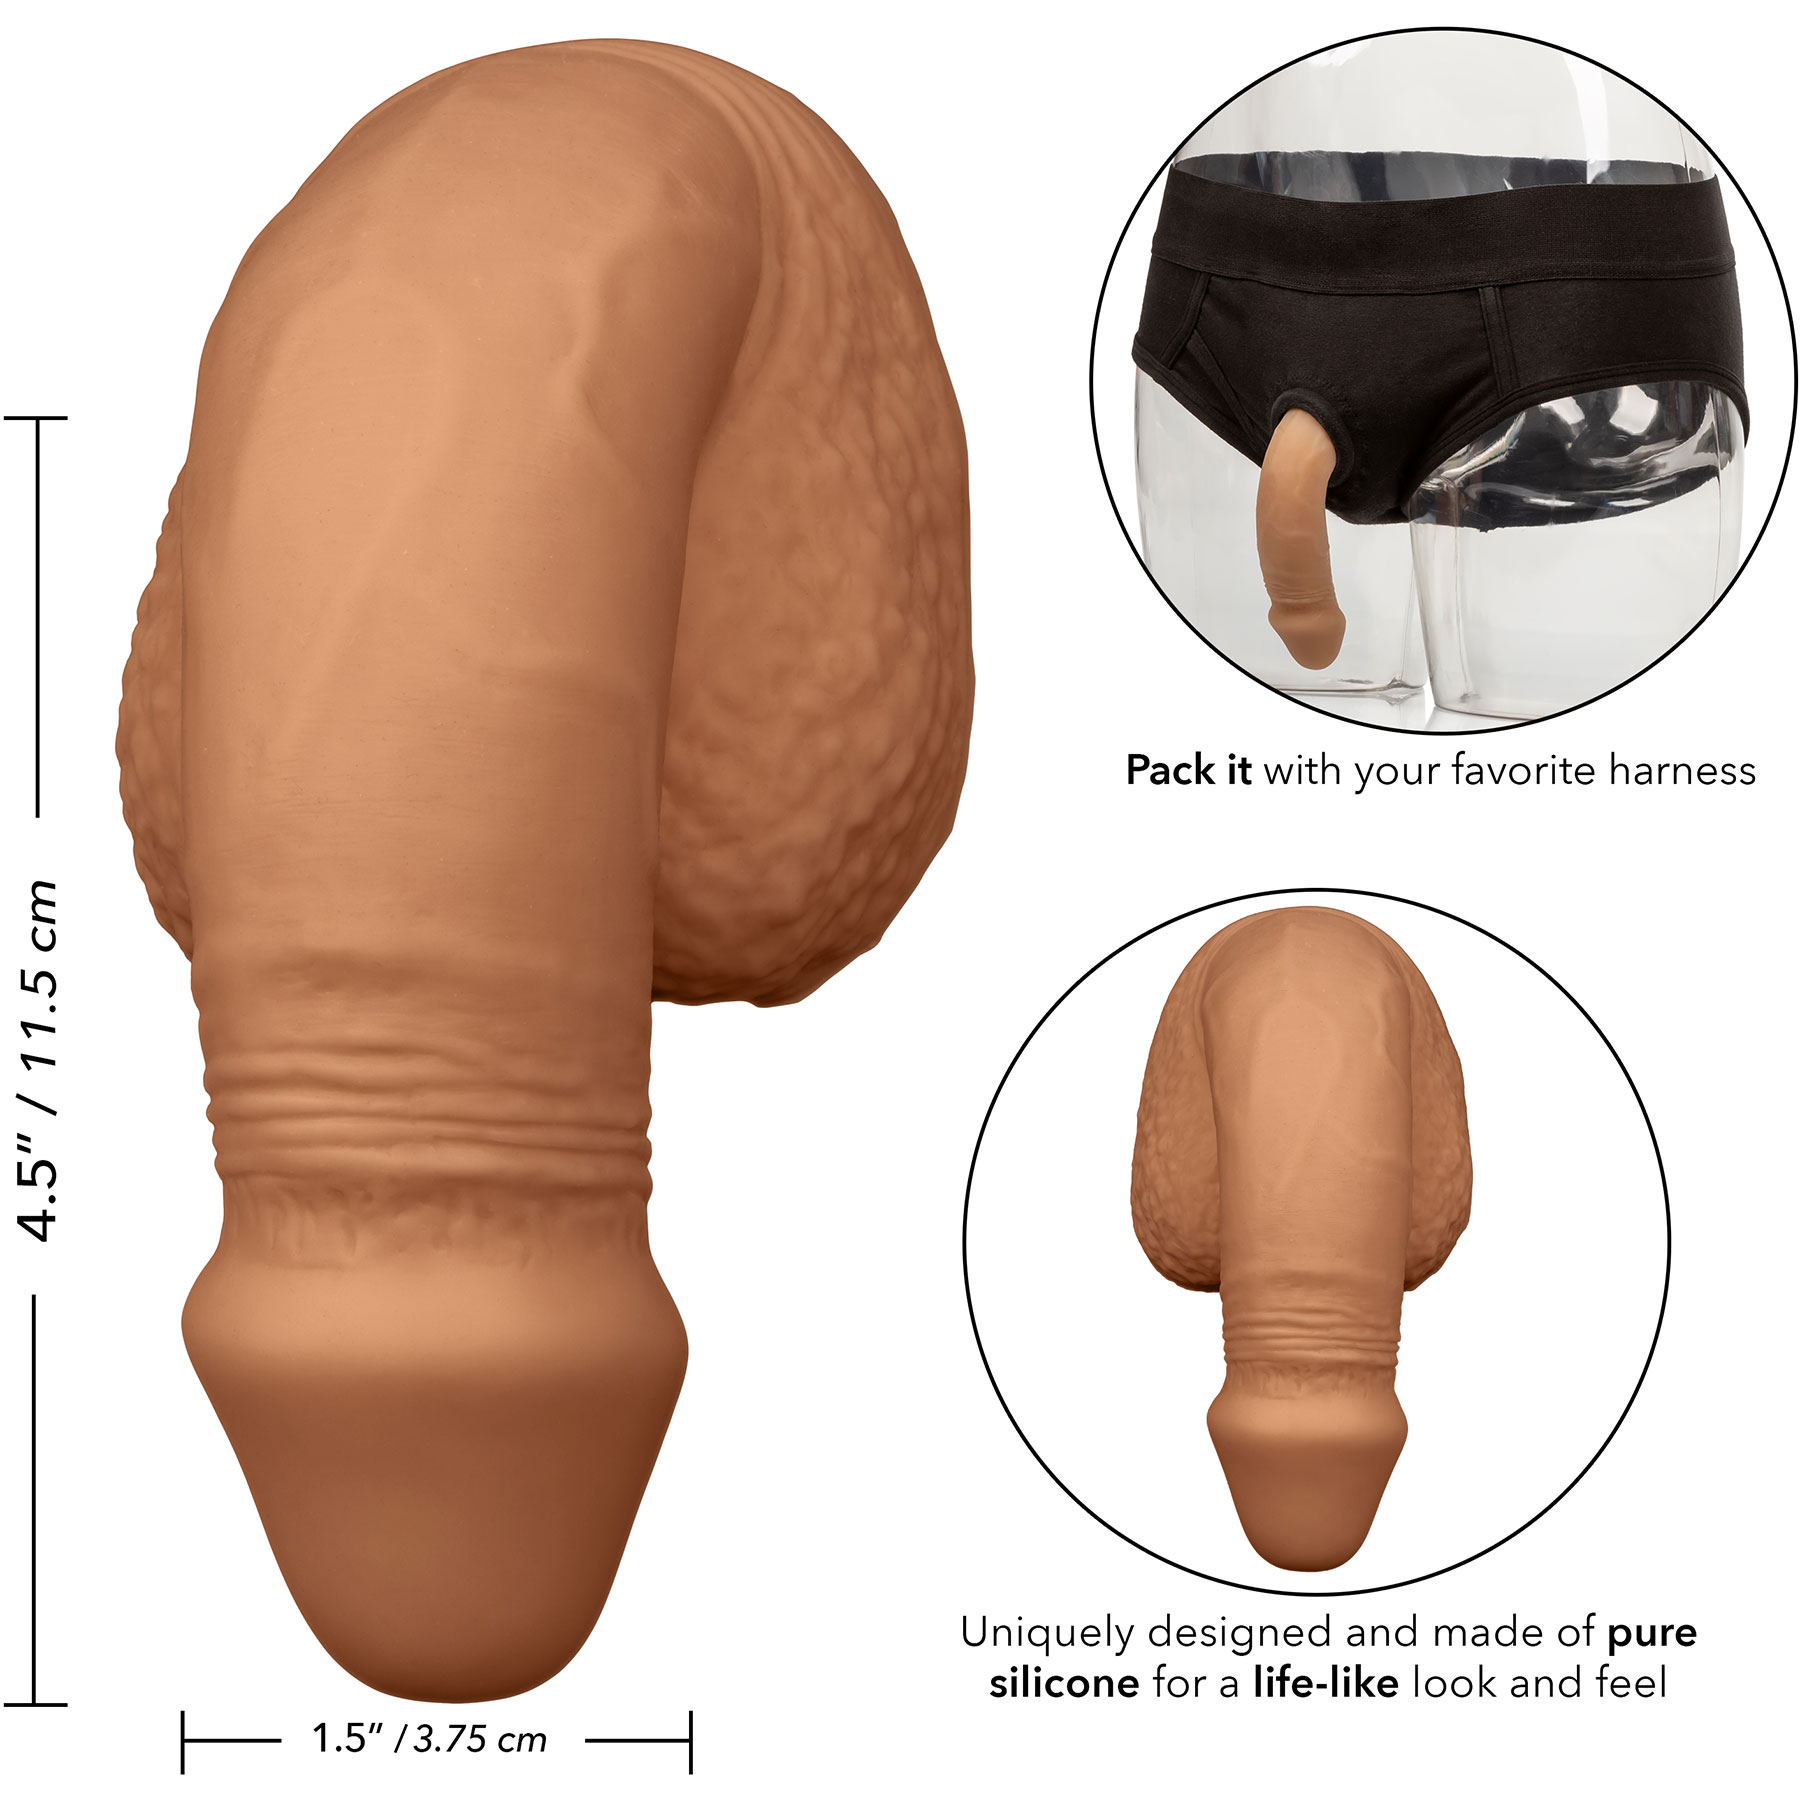 Packer Gear Silicone Packing Penis 5